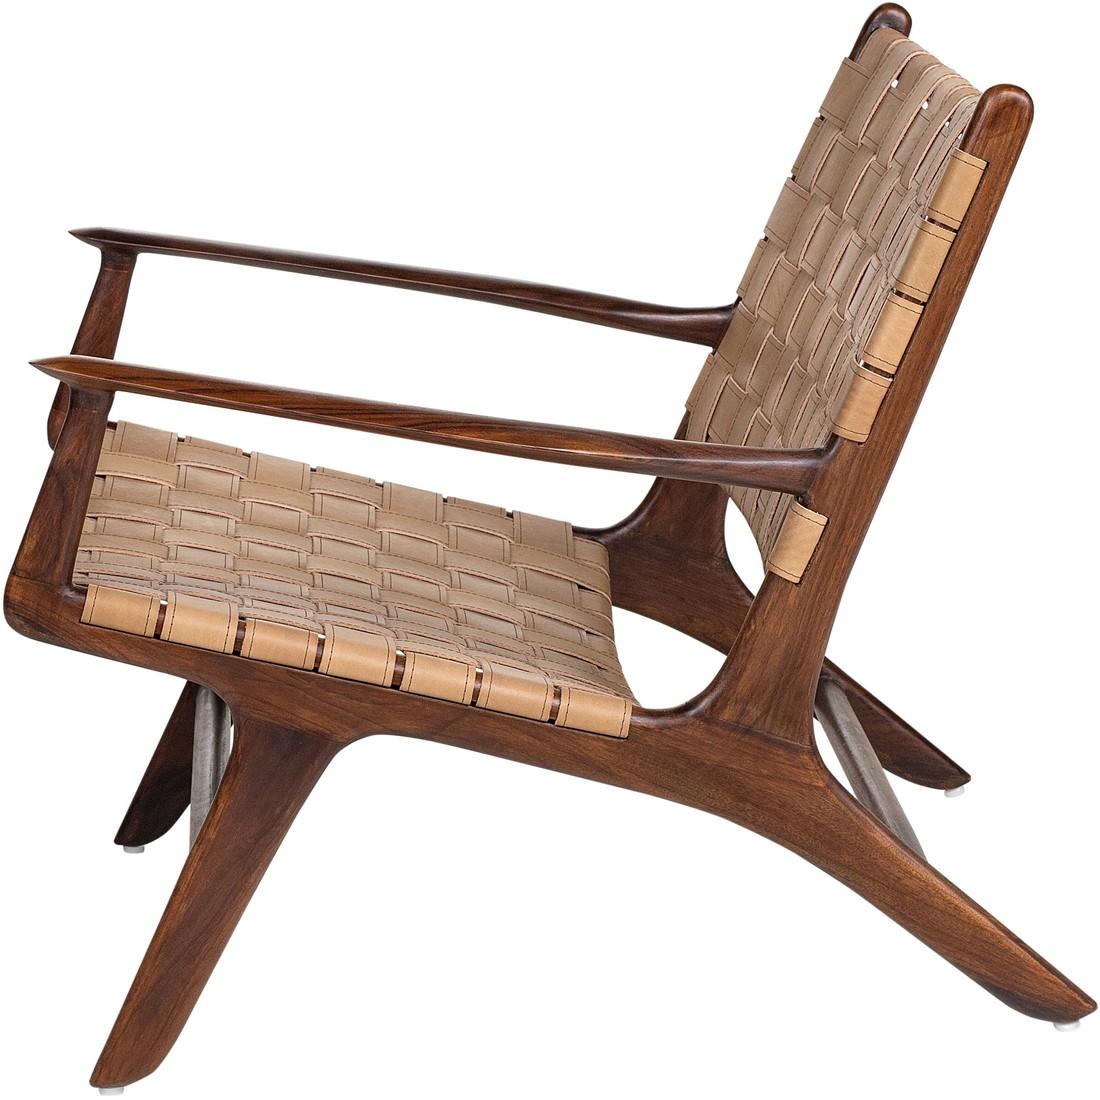 Contemporary Danish Design Style Teak Wooden and Leather Chair, 1950s-1960s